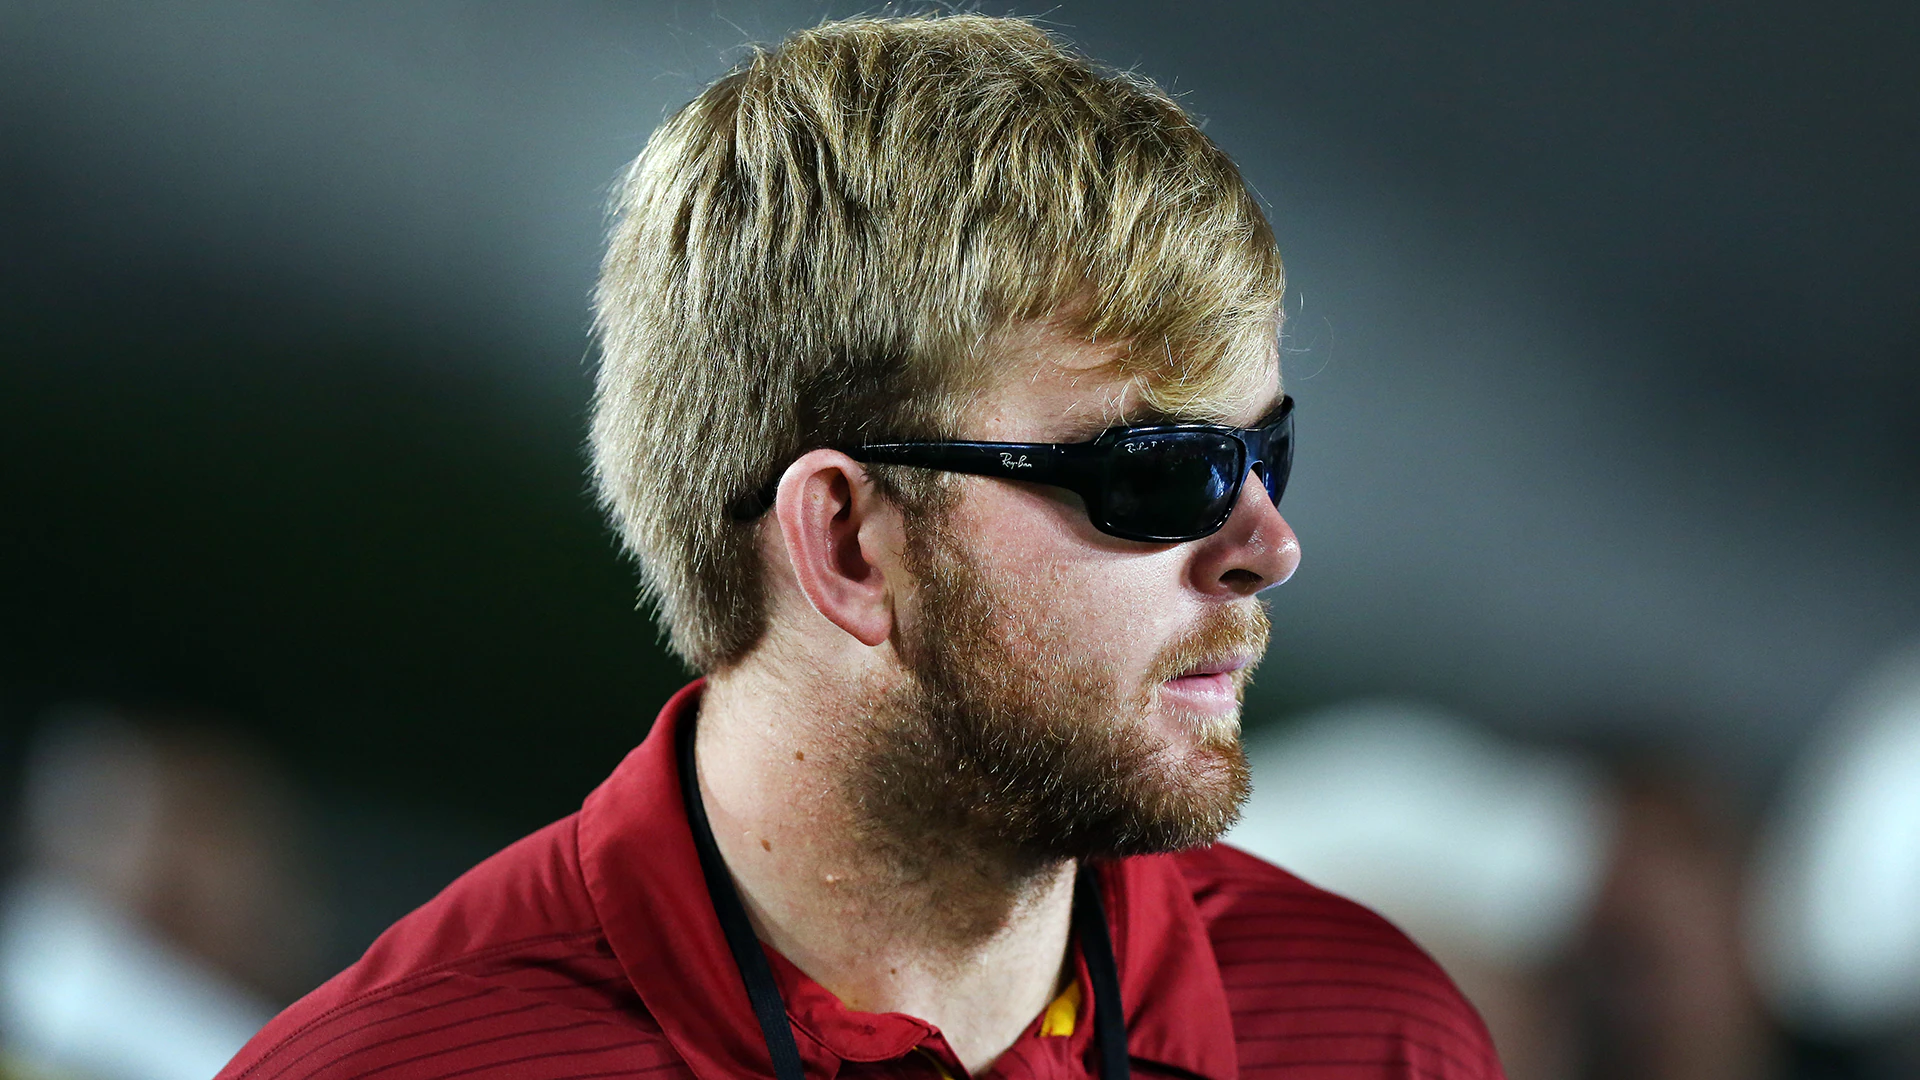 From L.A. Coliseum to Pinehurst, Jake Olson to make more history at U.S. Adaptive Open